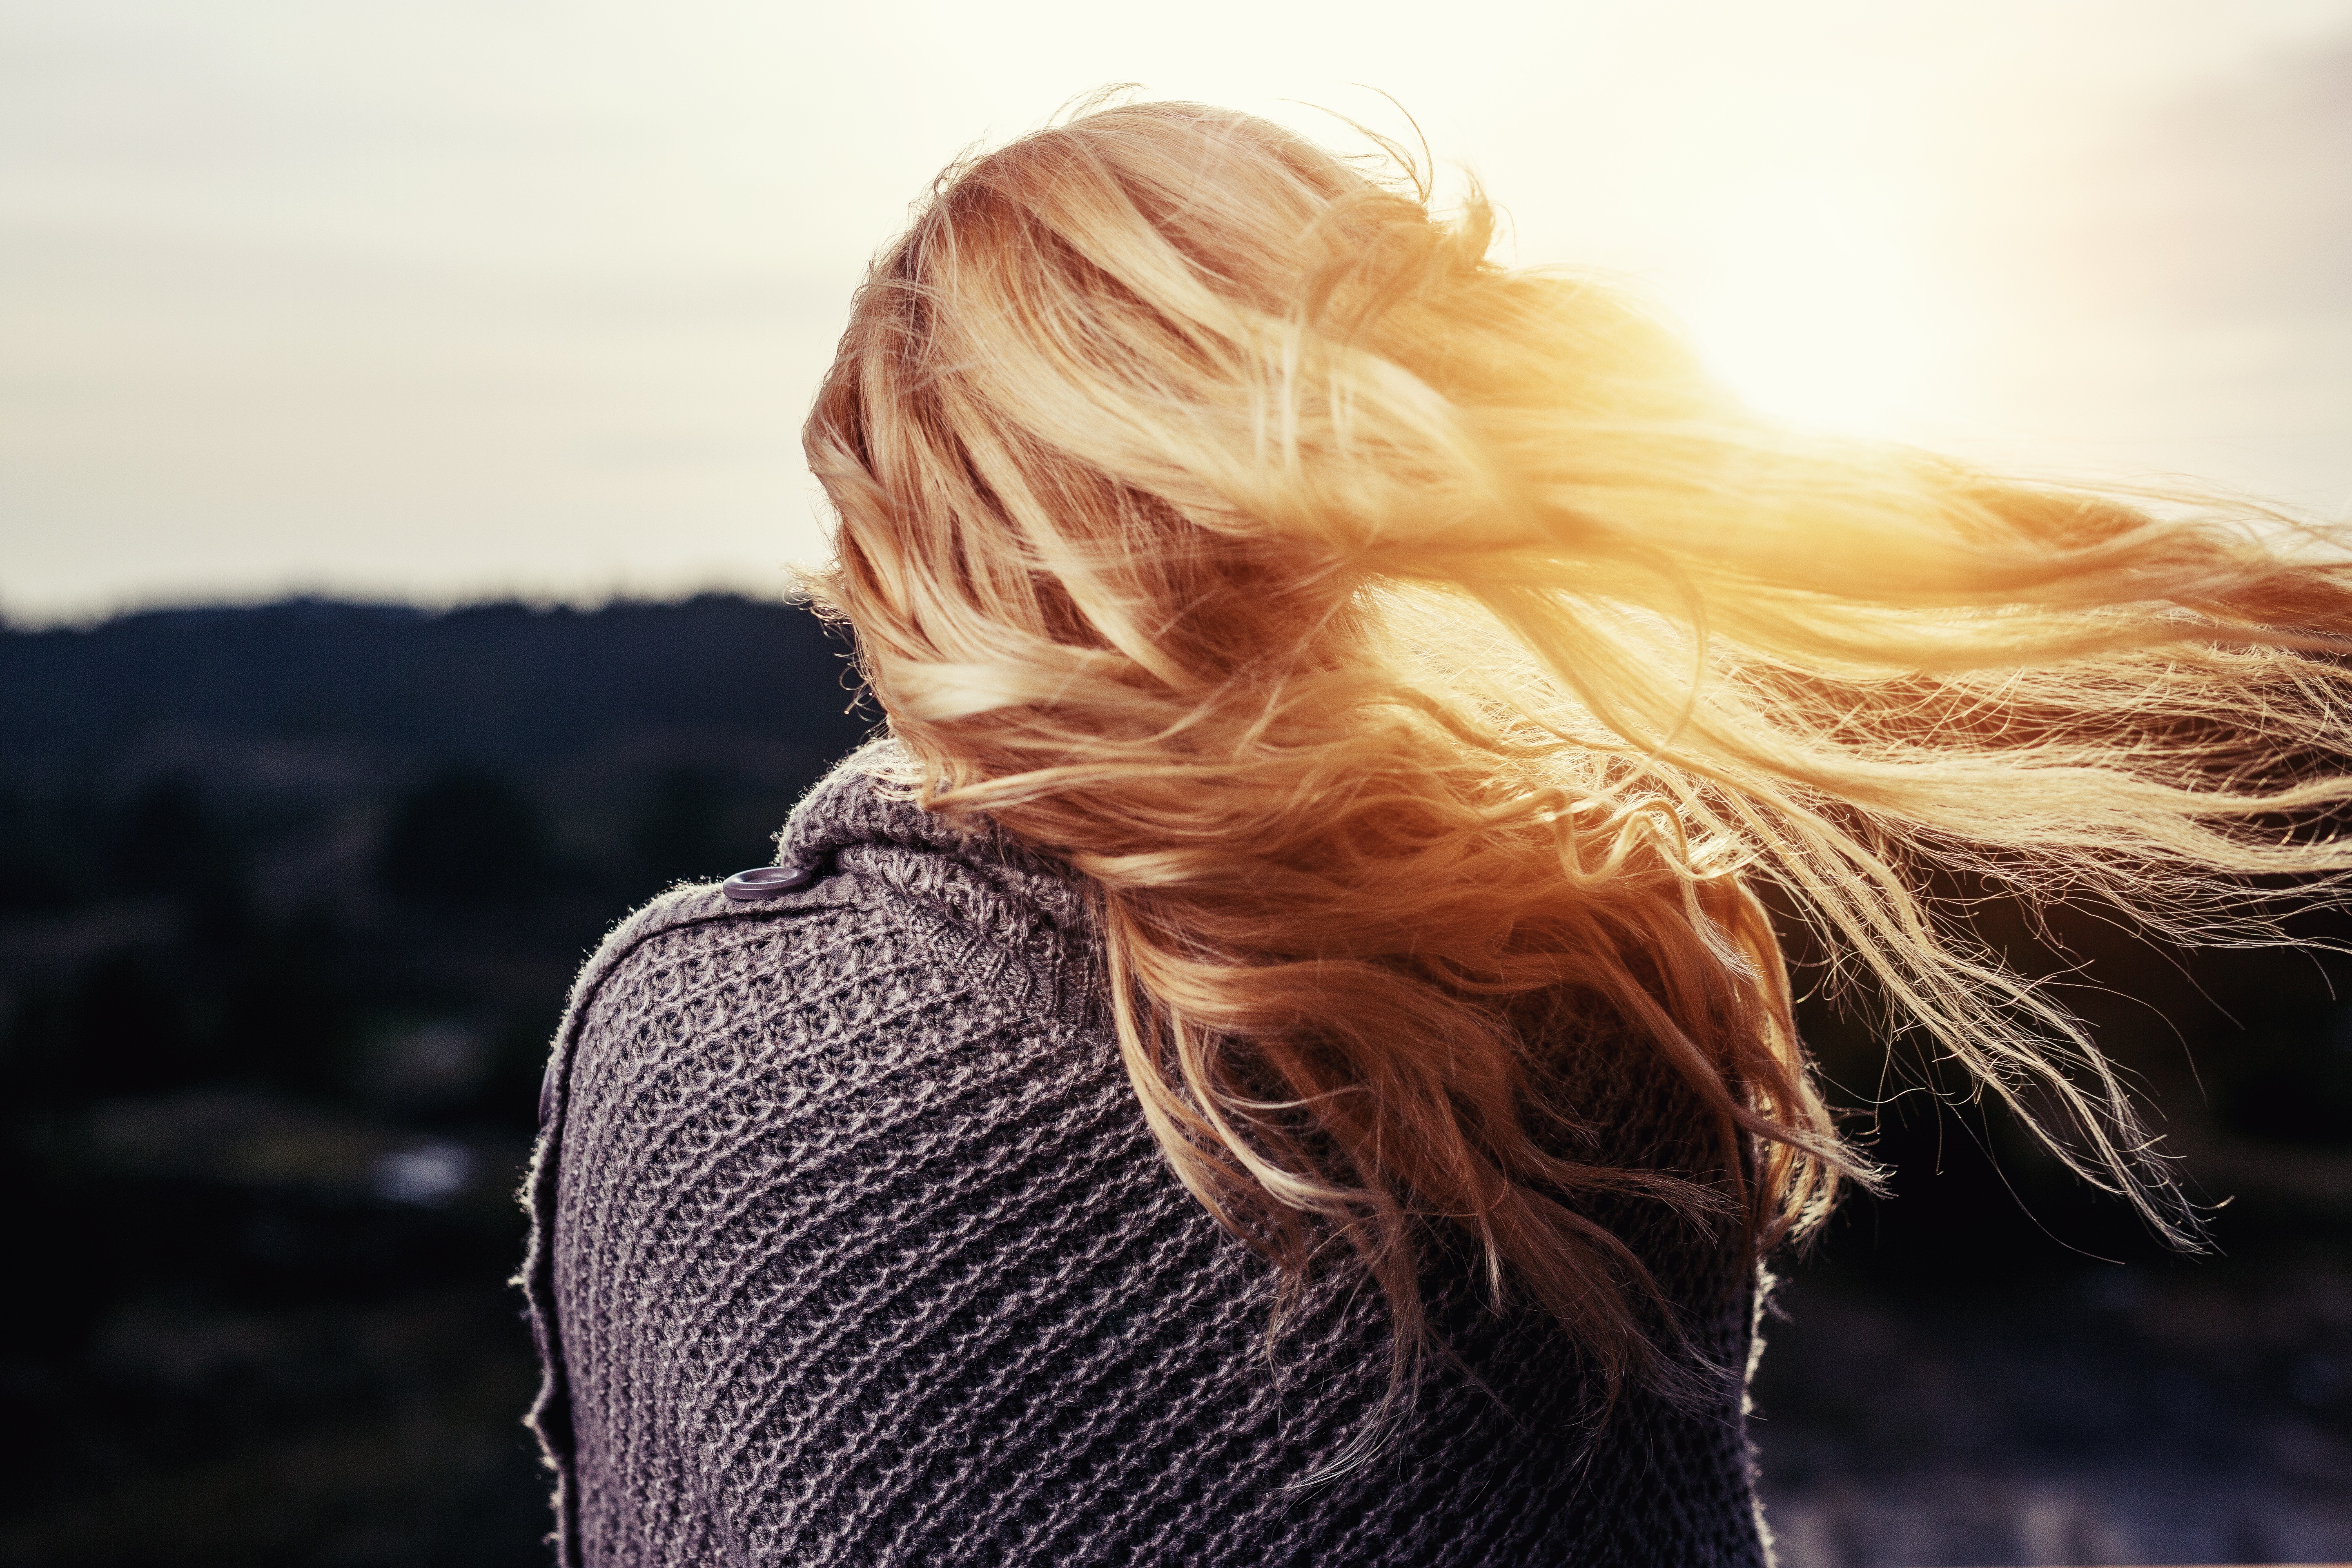 The Best Hair Beauty Habits You Need To Embrace To Wake Up With Perfect Hair